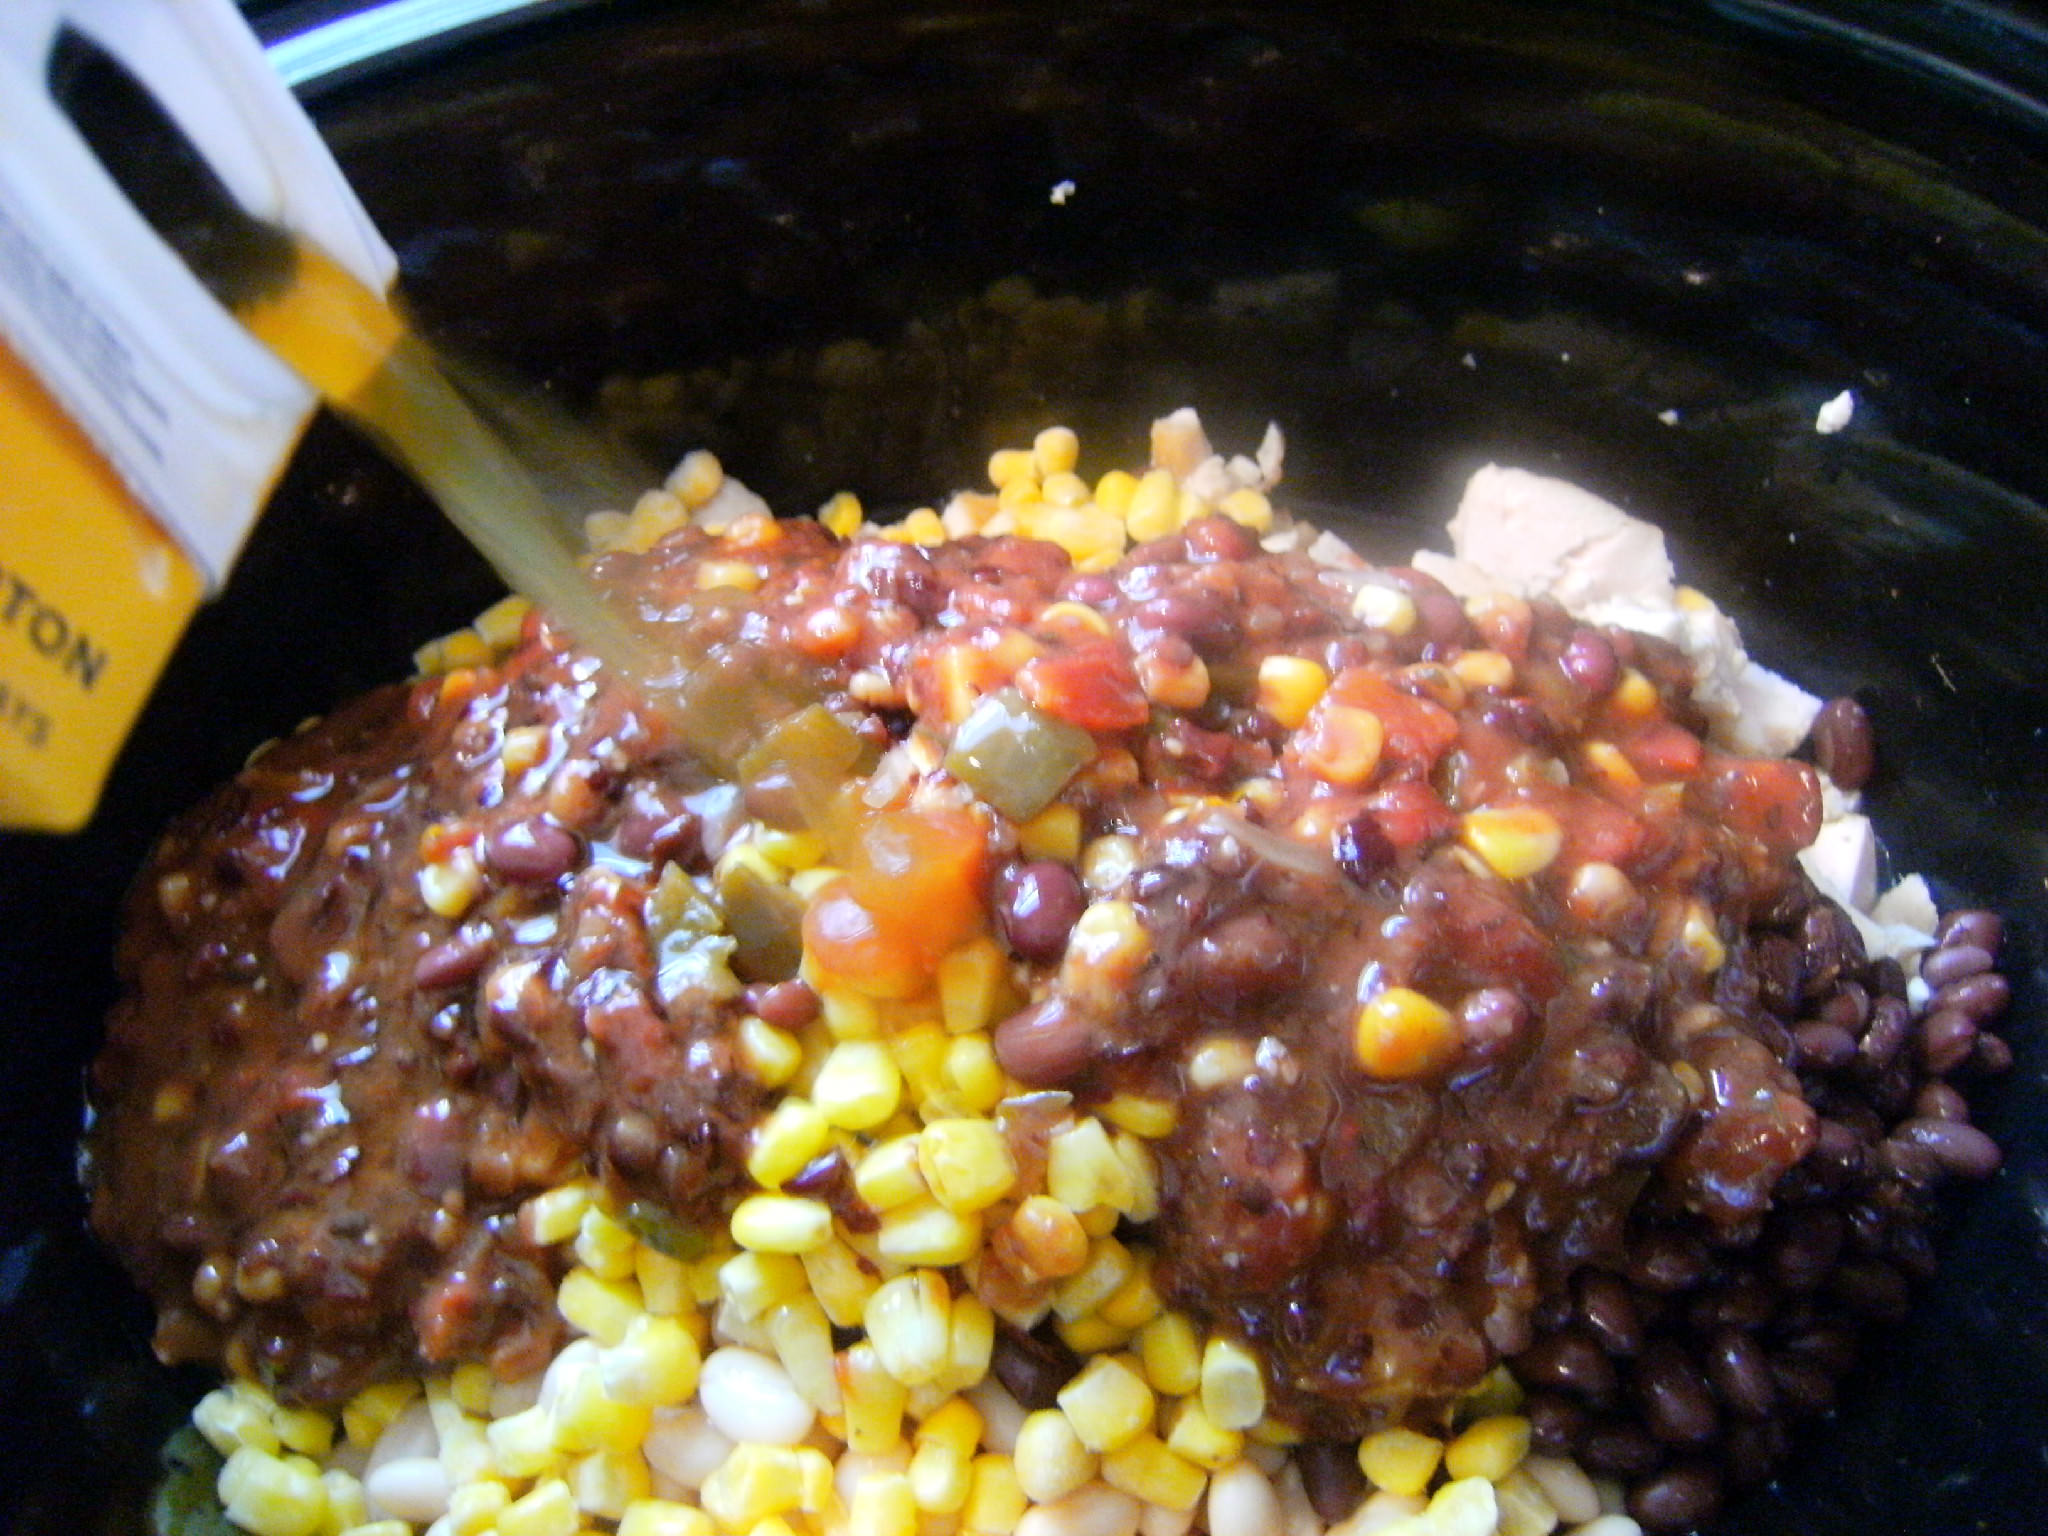 adding ingredients needed to make slow cooker chicken chili